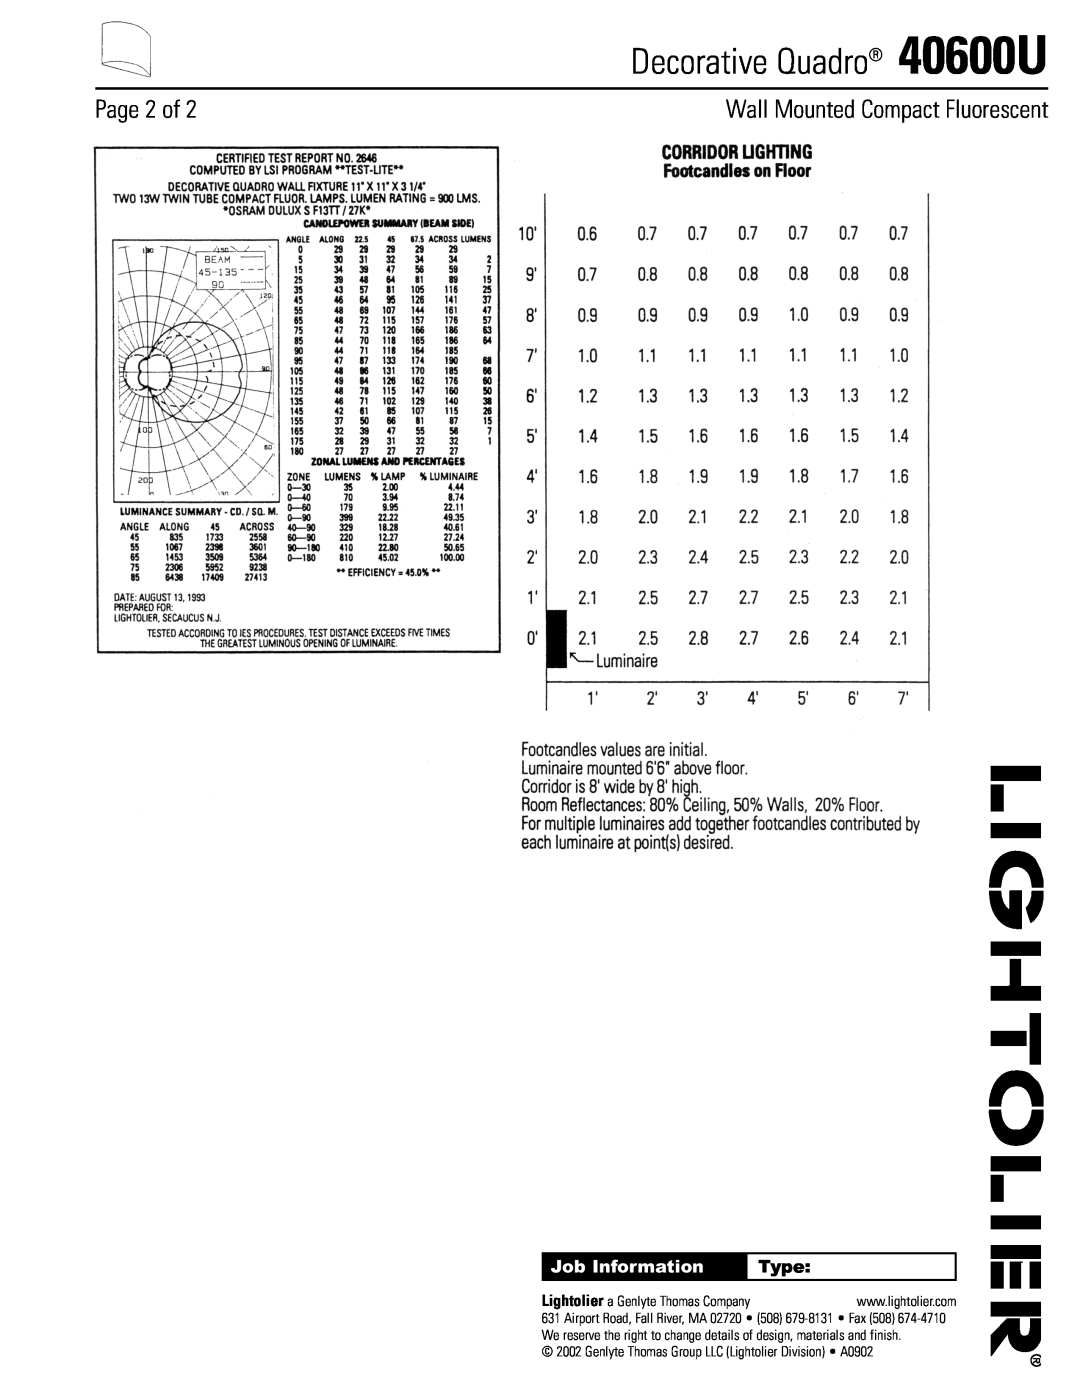 Lightolier specifications Page 2 of, Type, Decorative Quadro 40600U, Wall Mounted Compact Fluorescent, Job Information 